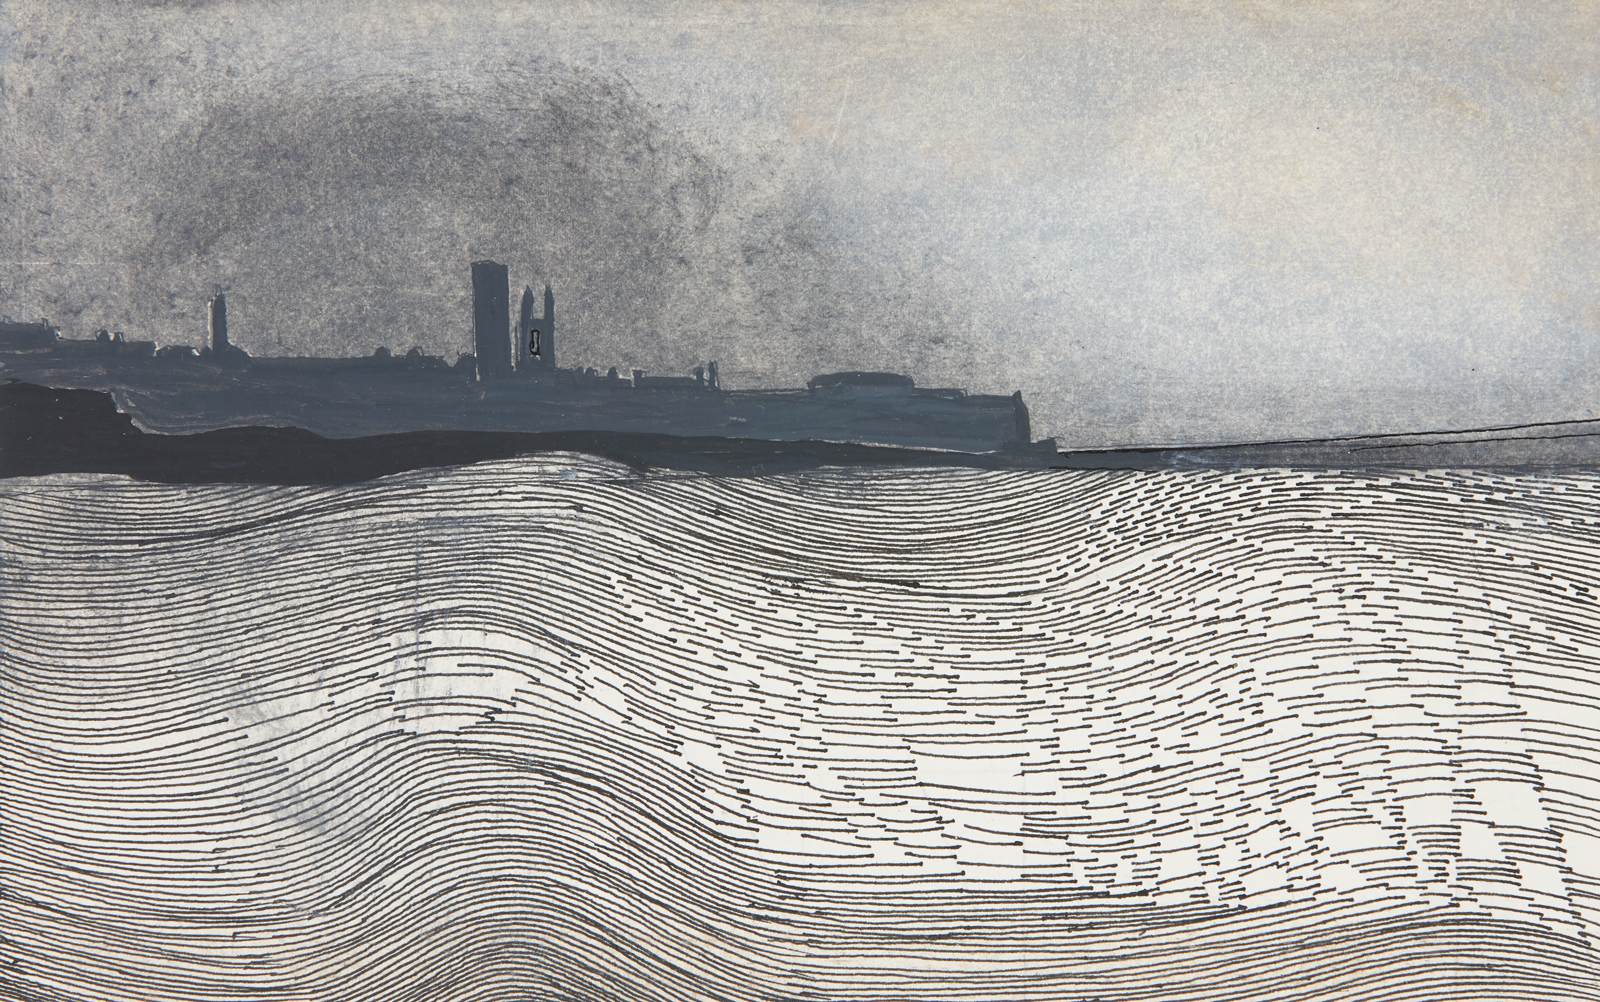 A silhouette of the coastline of St Andrews with the sea in the foreground drawn in in fine parallel undulating lines.